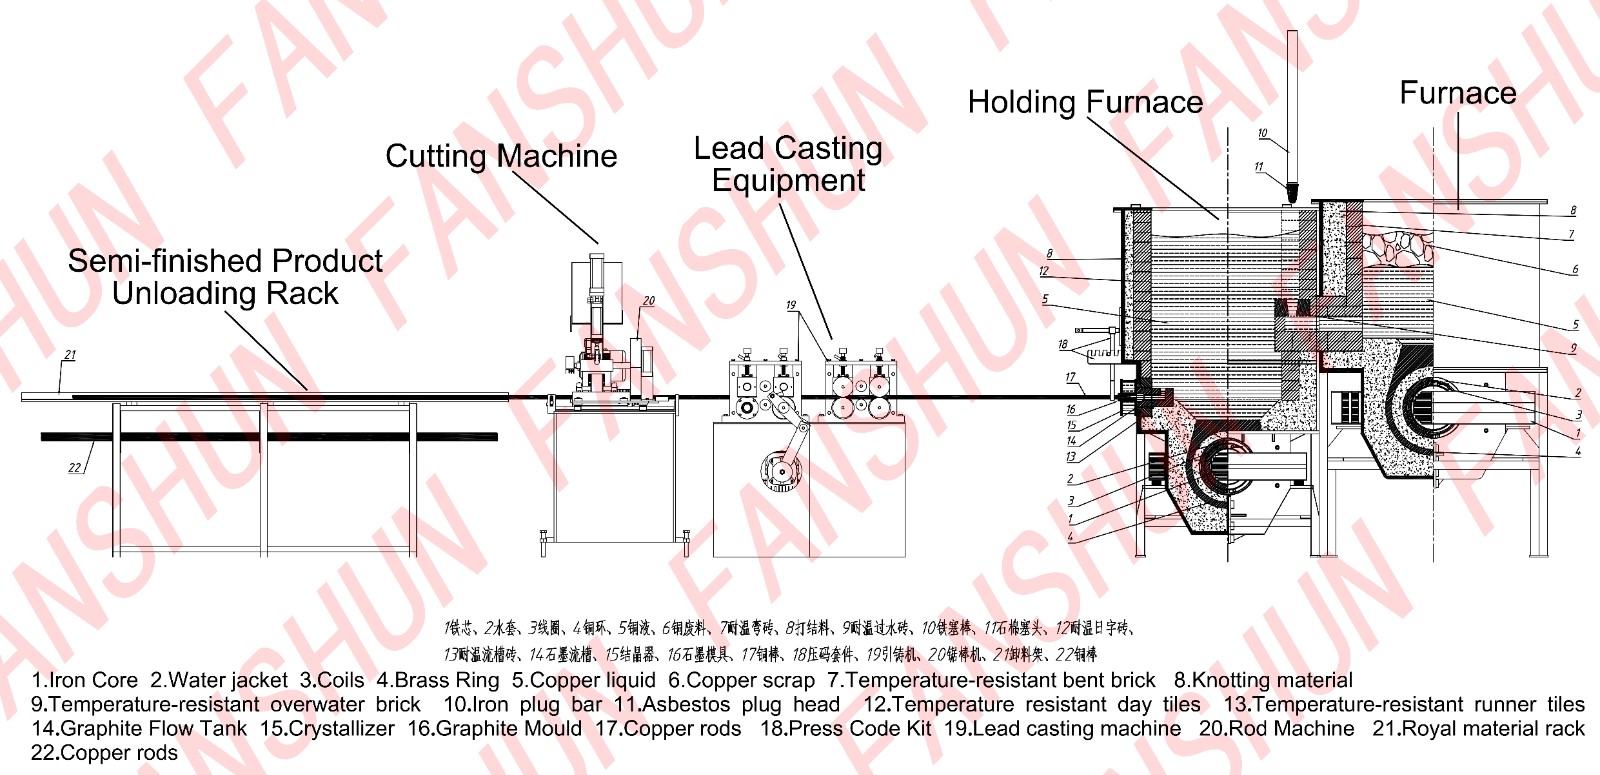 Producing copper rod furnaces